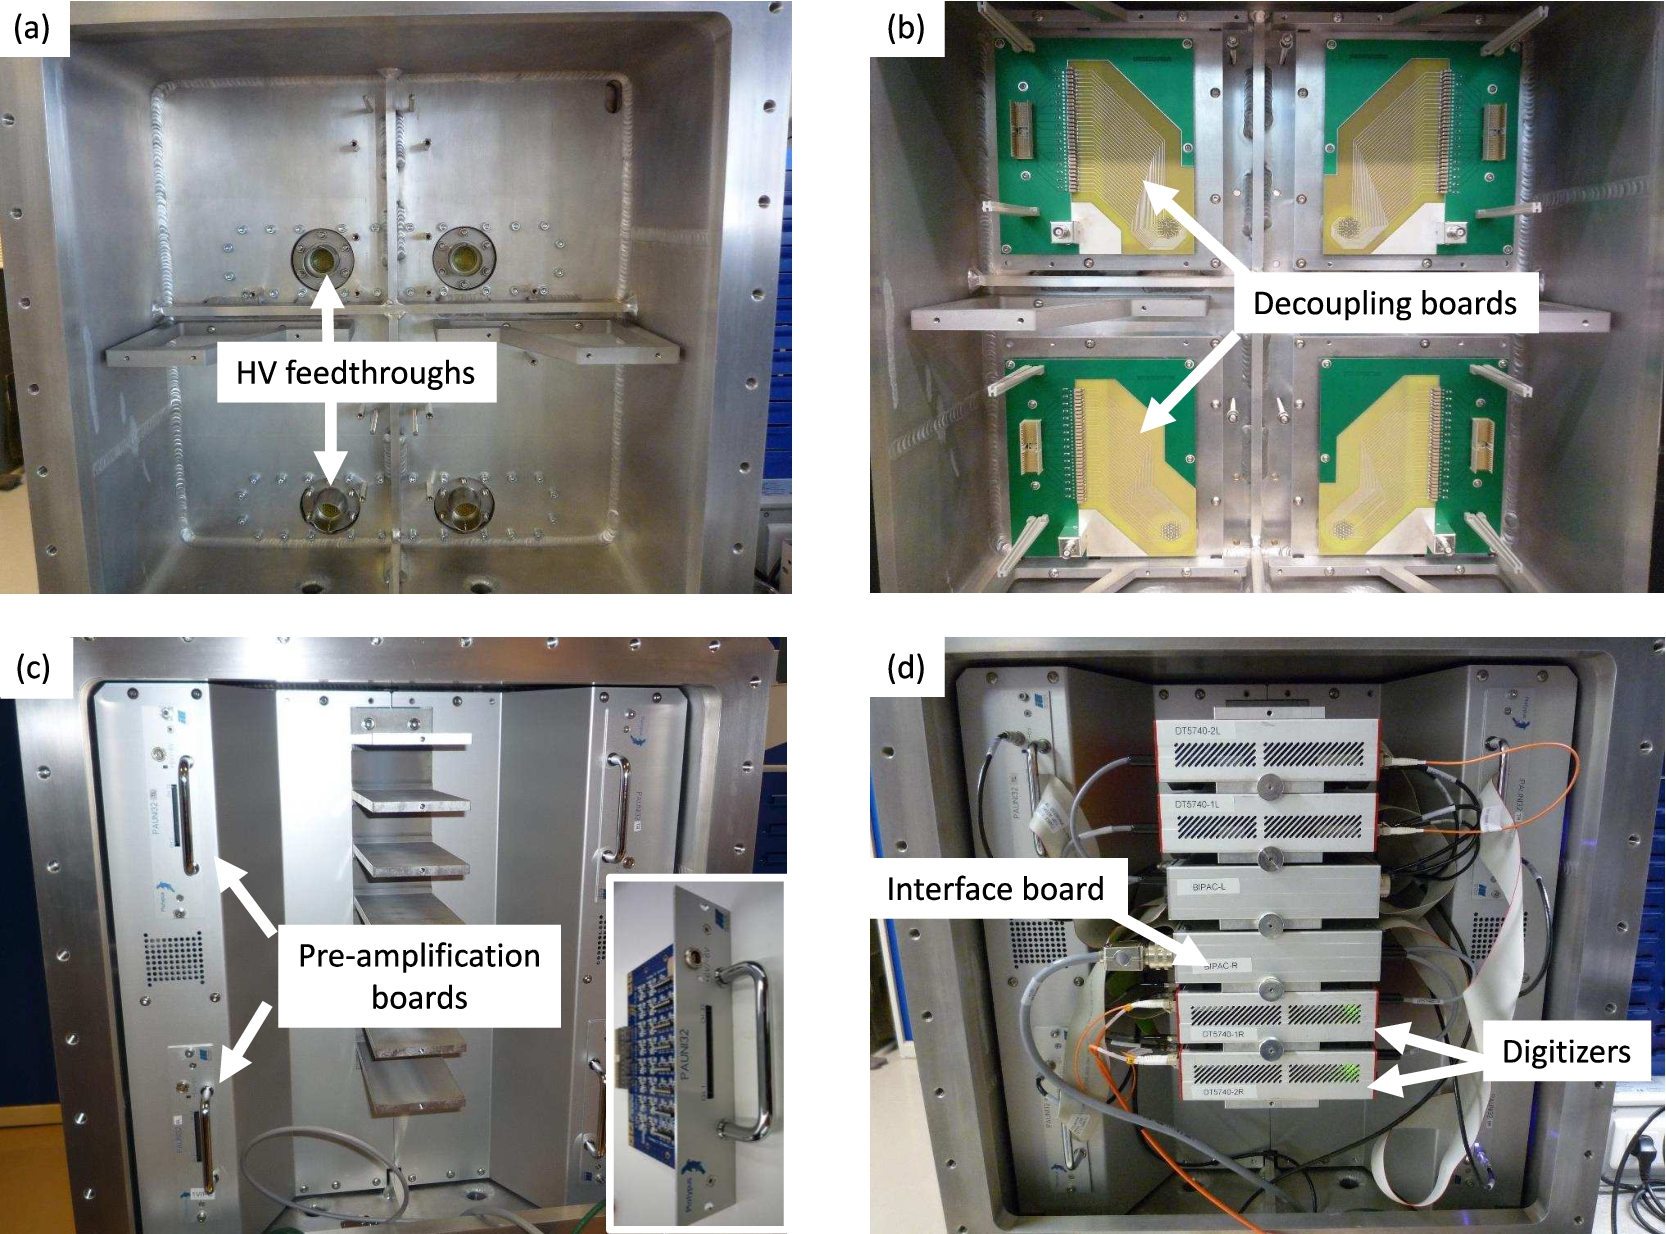 Front-end electronics at various assembly stages: (a) electronics enclosure with HV feedthroughs, (b) decoupling boards connnected to the HV feedthroughs, (c) pre-amplification cards connected to the decoupling boards, (d) digitizers and interface boards mounted in the enclosure.